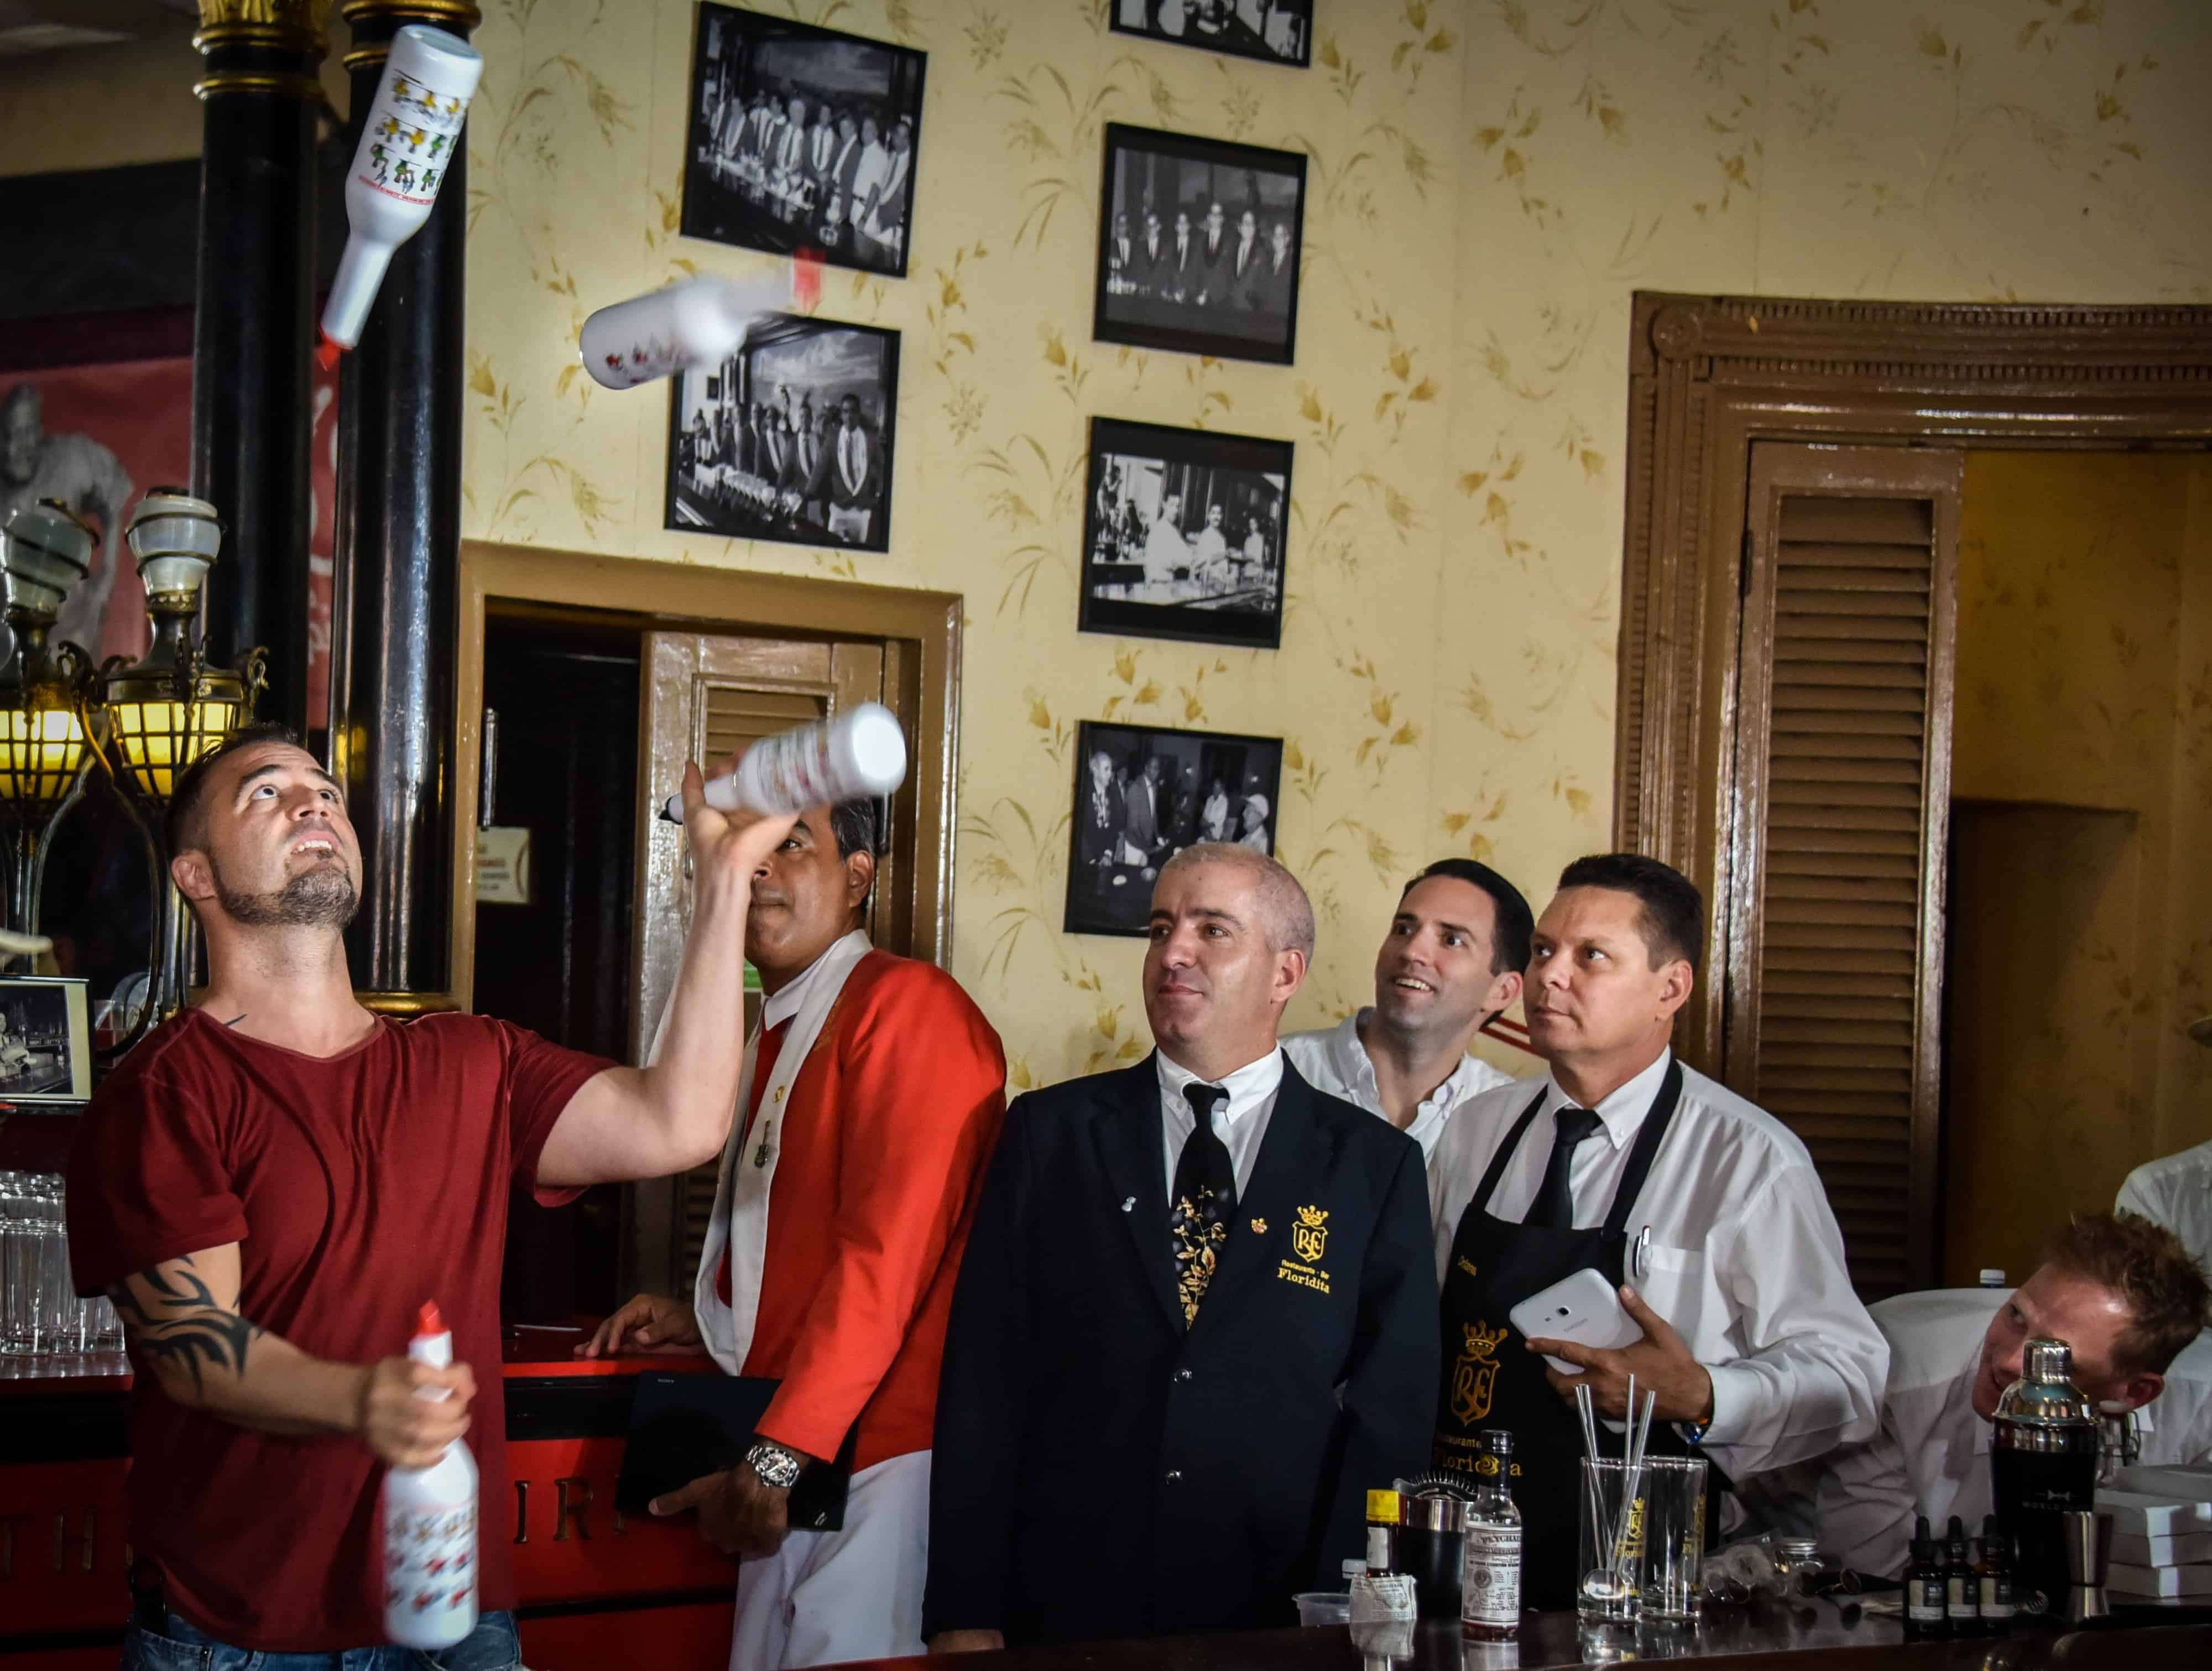 Argentine bartender Christian Delpech (left), who lives and works in Las Vegas, plays with bottles of rum at the Floridita bar in Havana, on July 24, 2015.